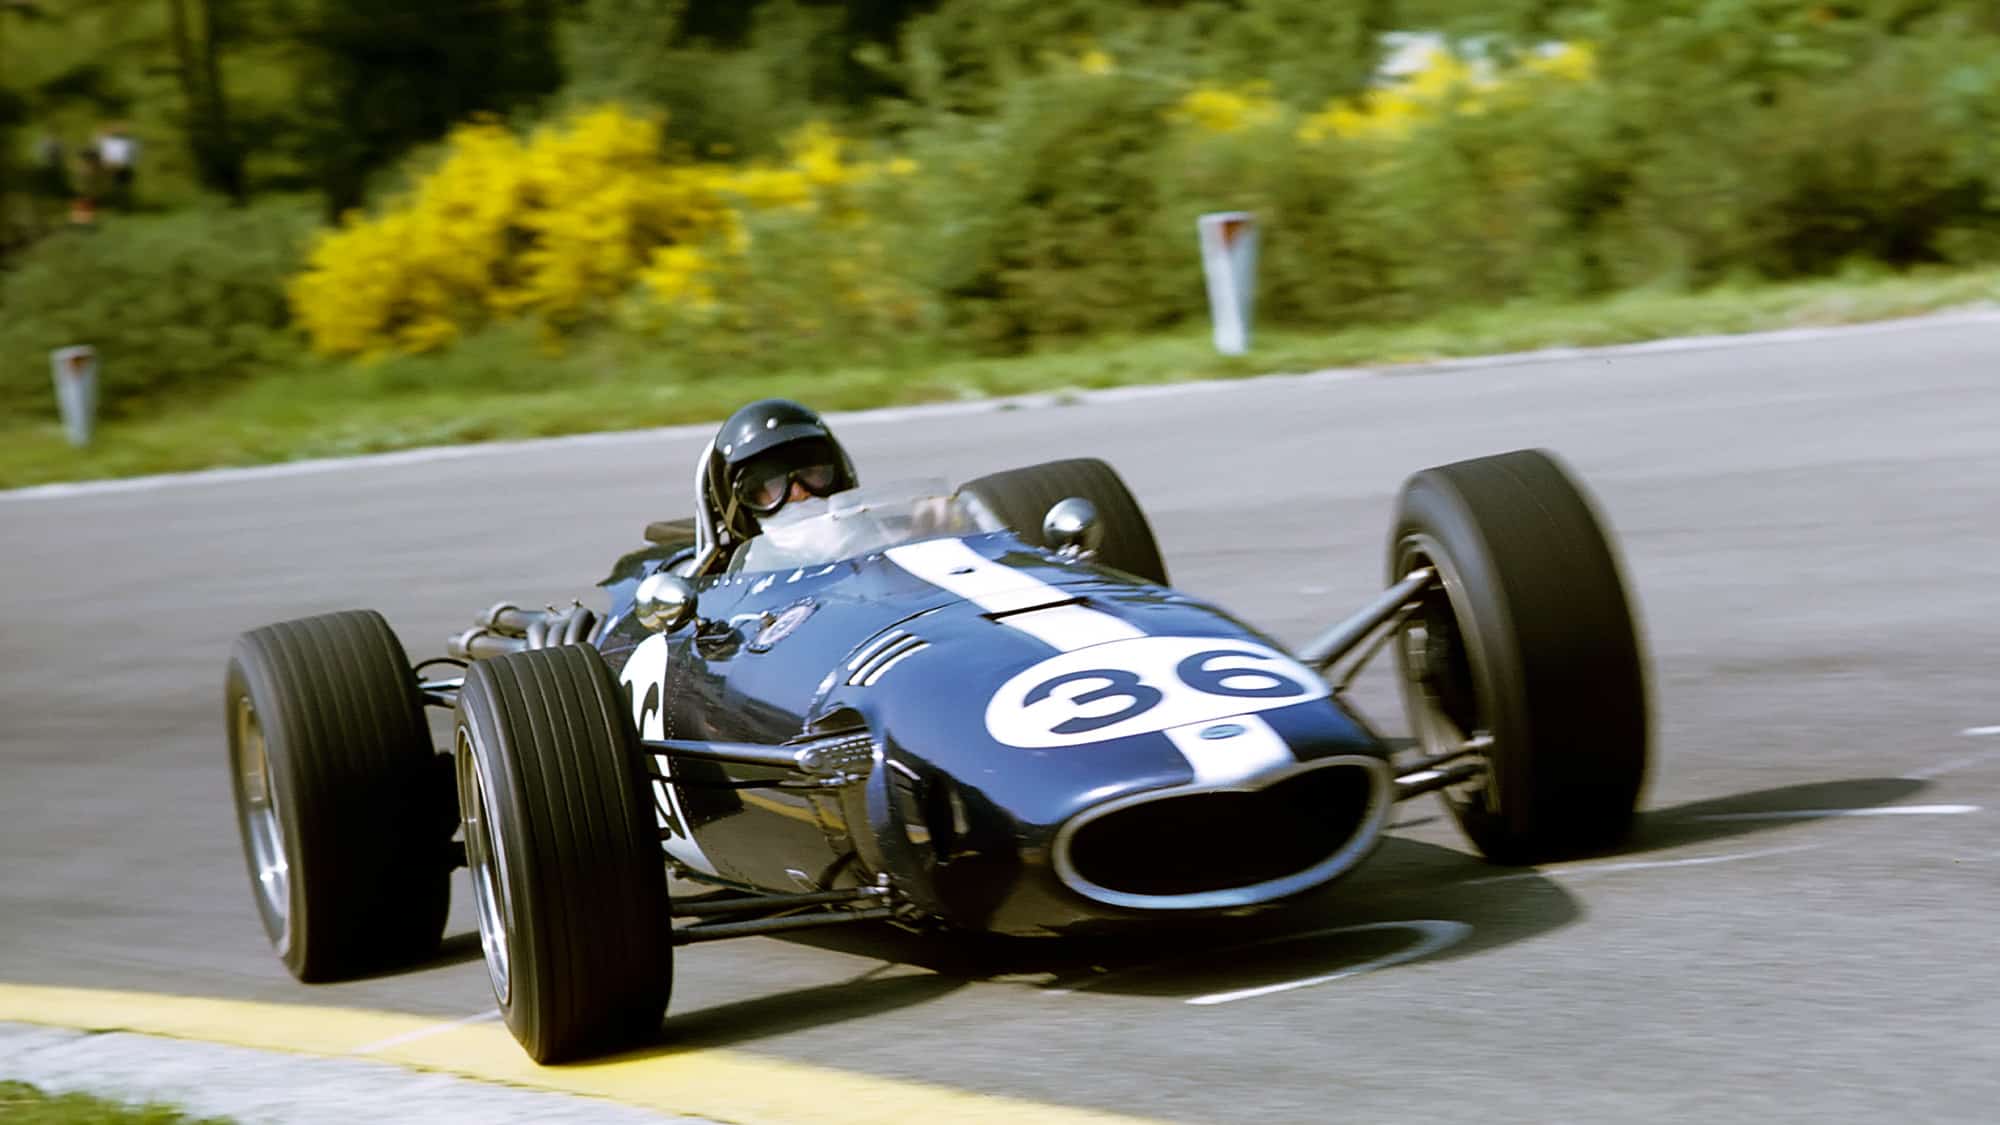 The Eagle was grounded: Gurney's Mk1 successor that never raced